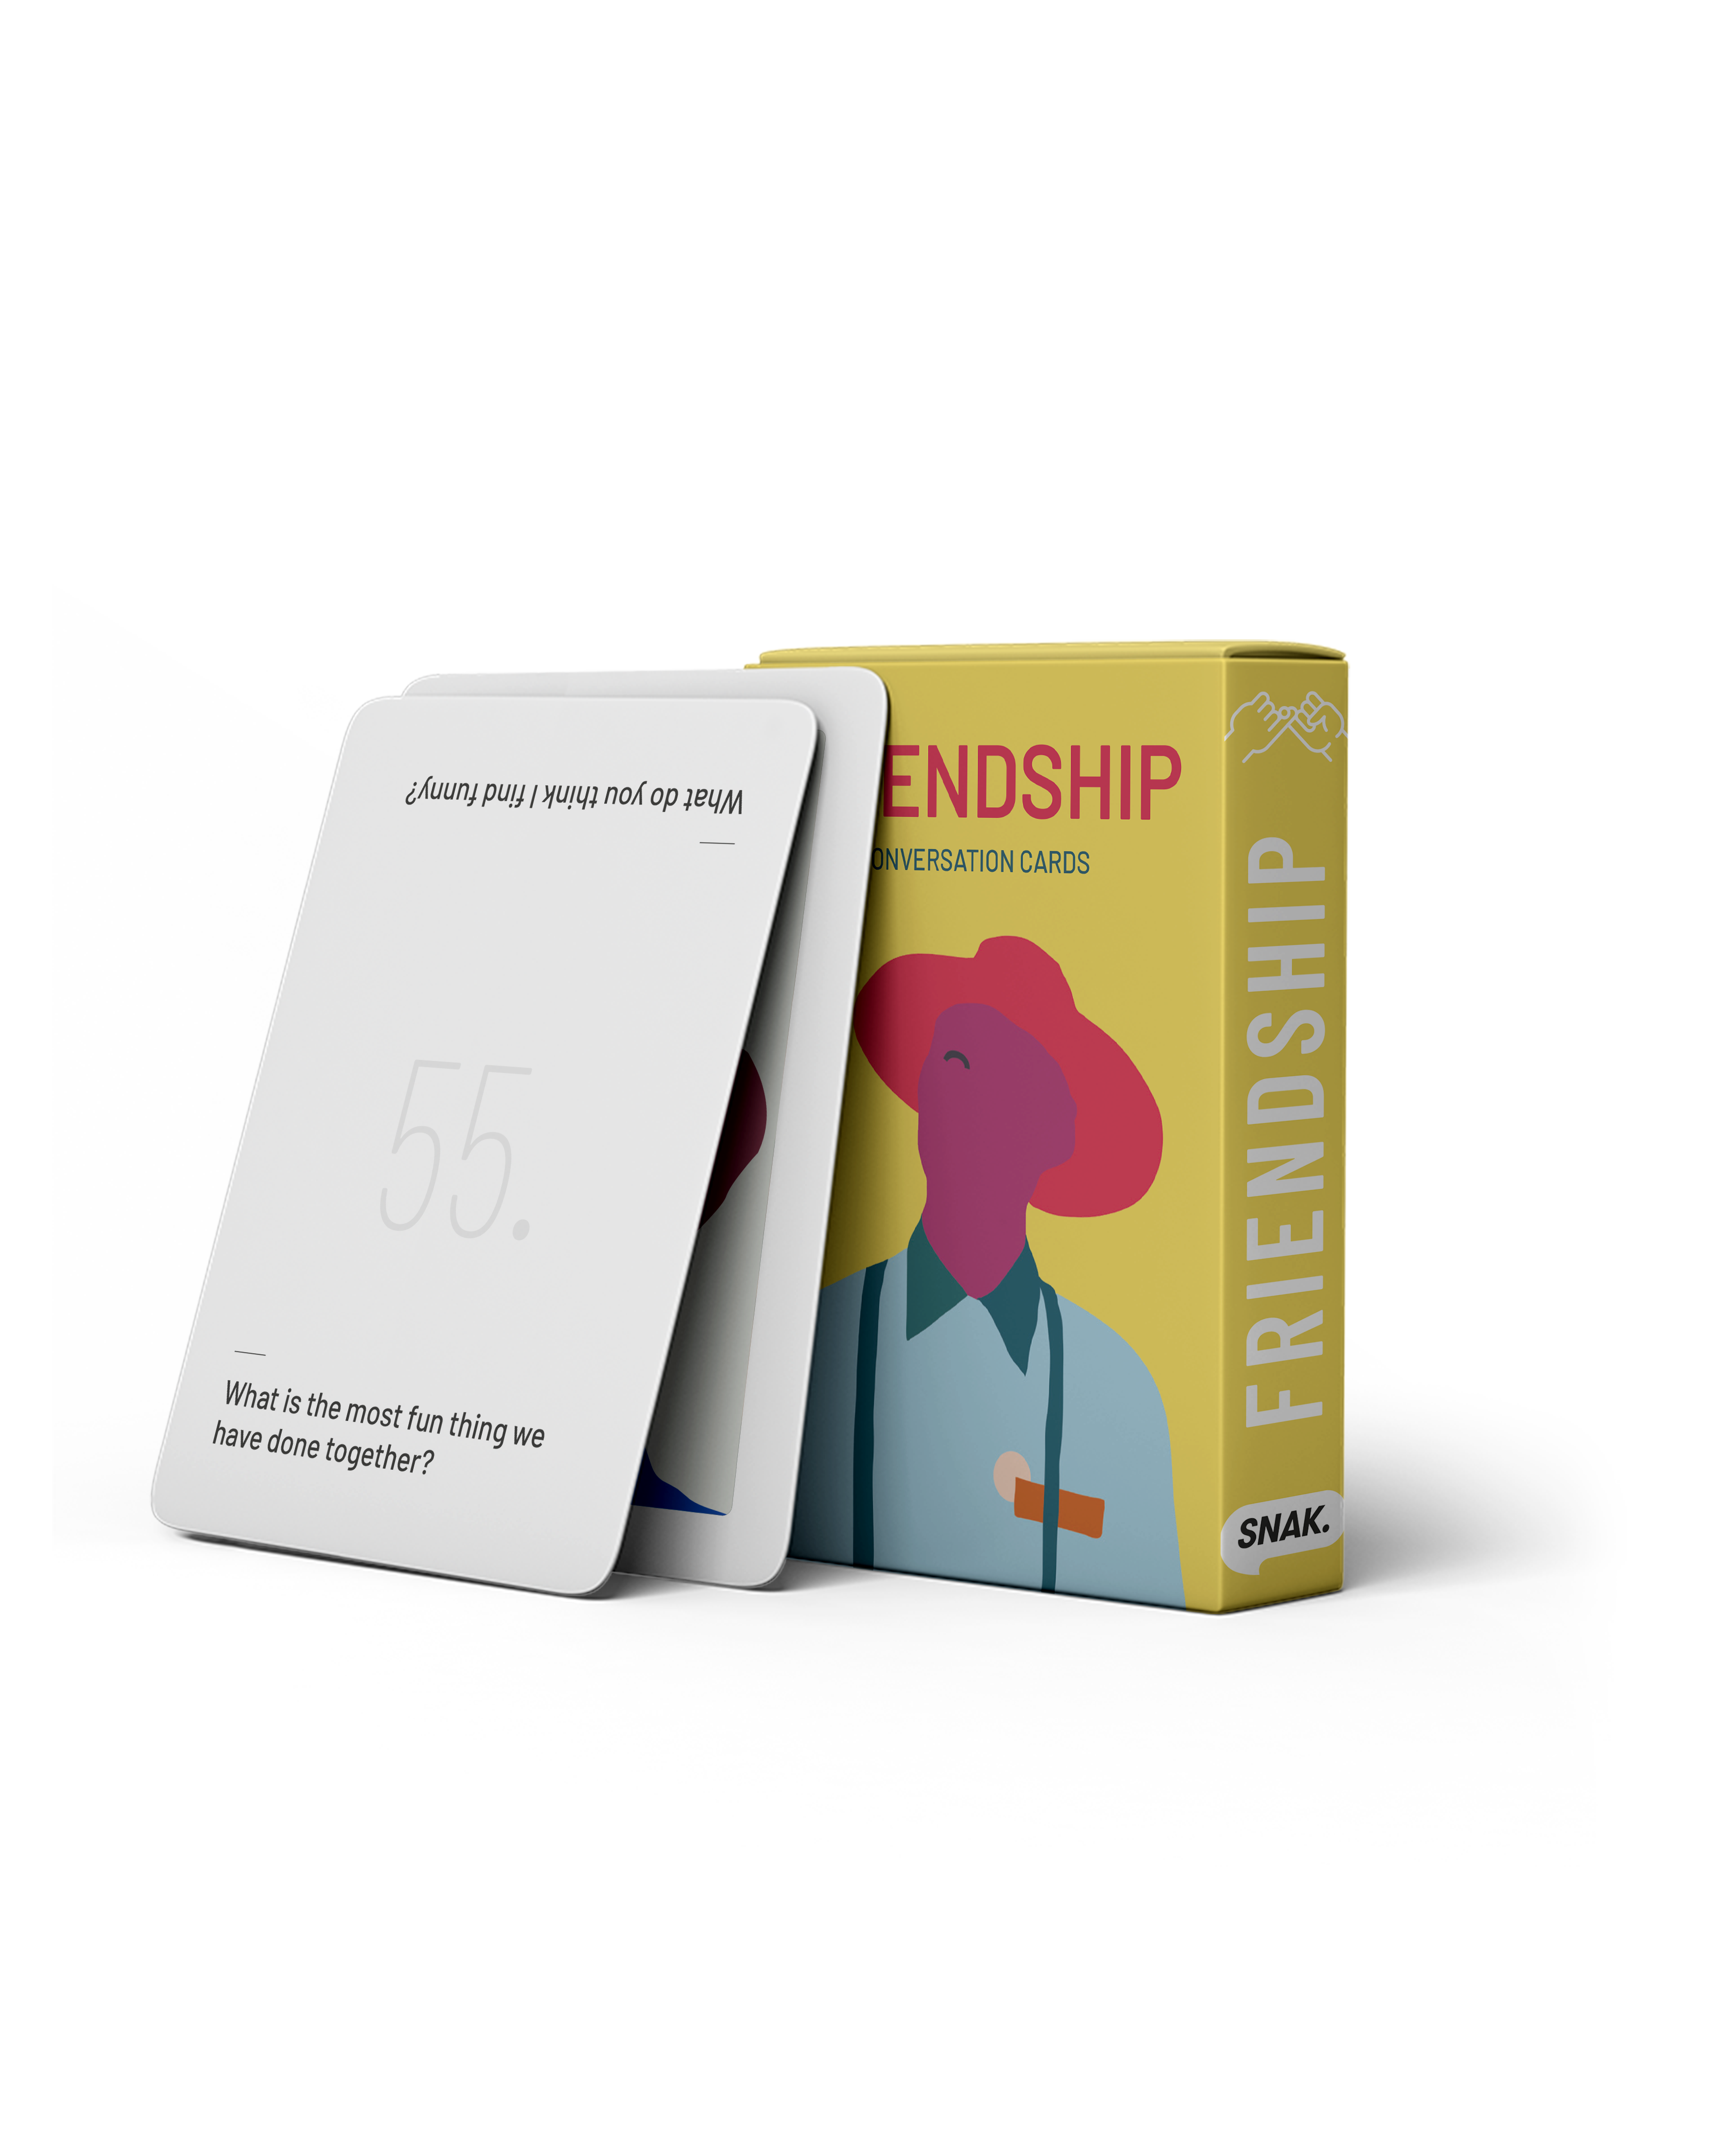 FRIENDSHIP - Pay homage to friendship with these conversation cards.